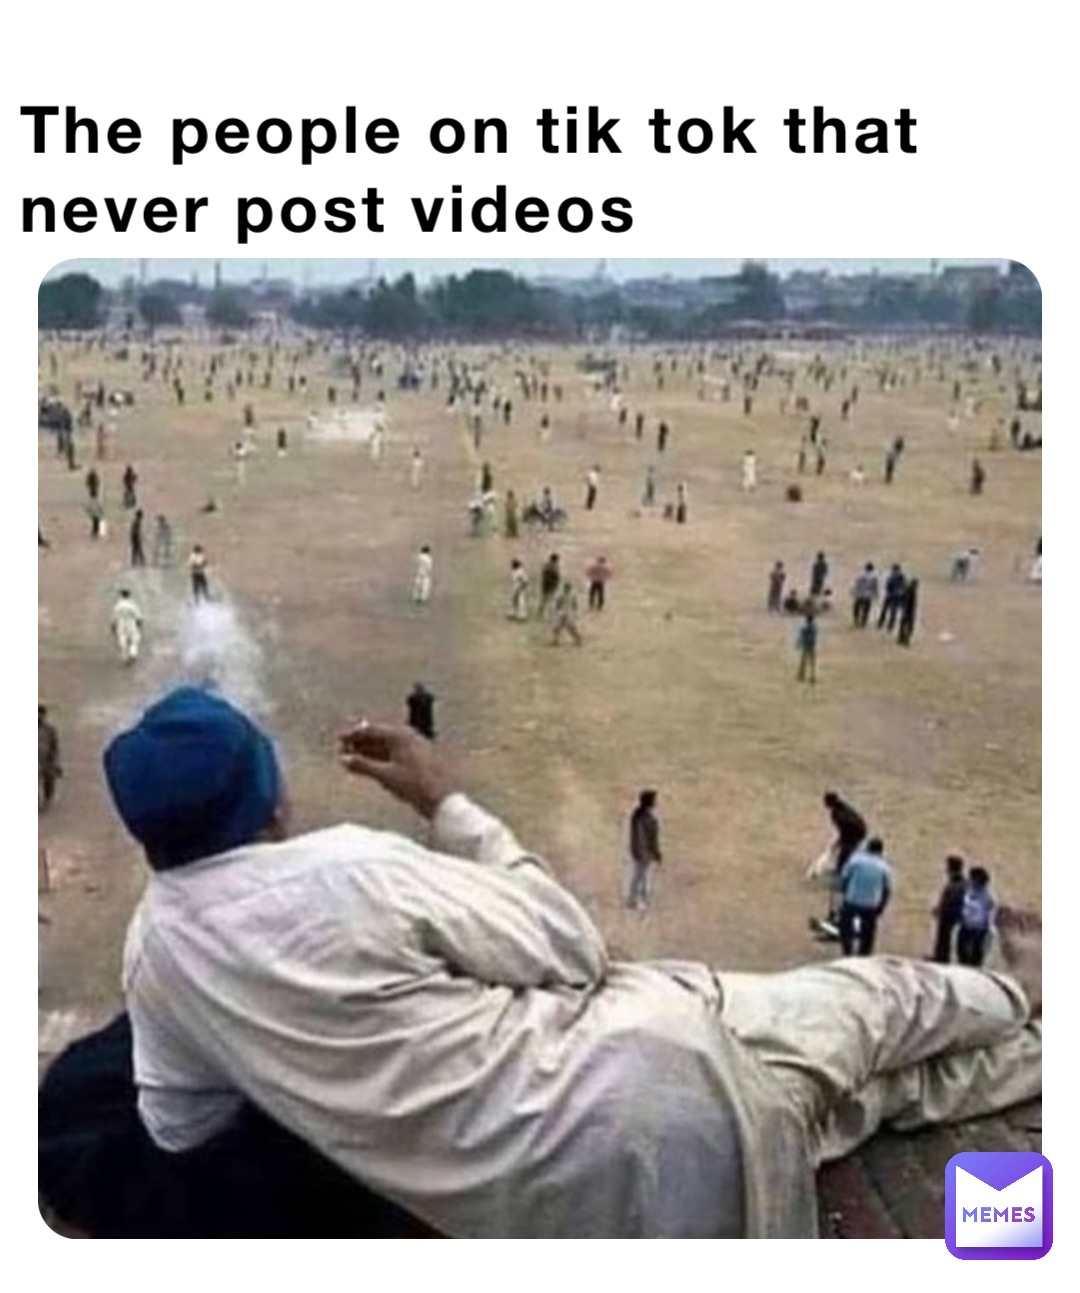 The people on tik tok that never post videos